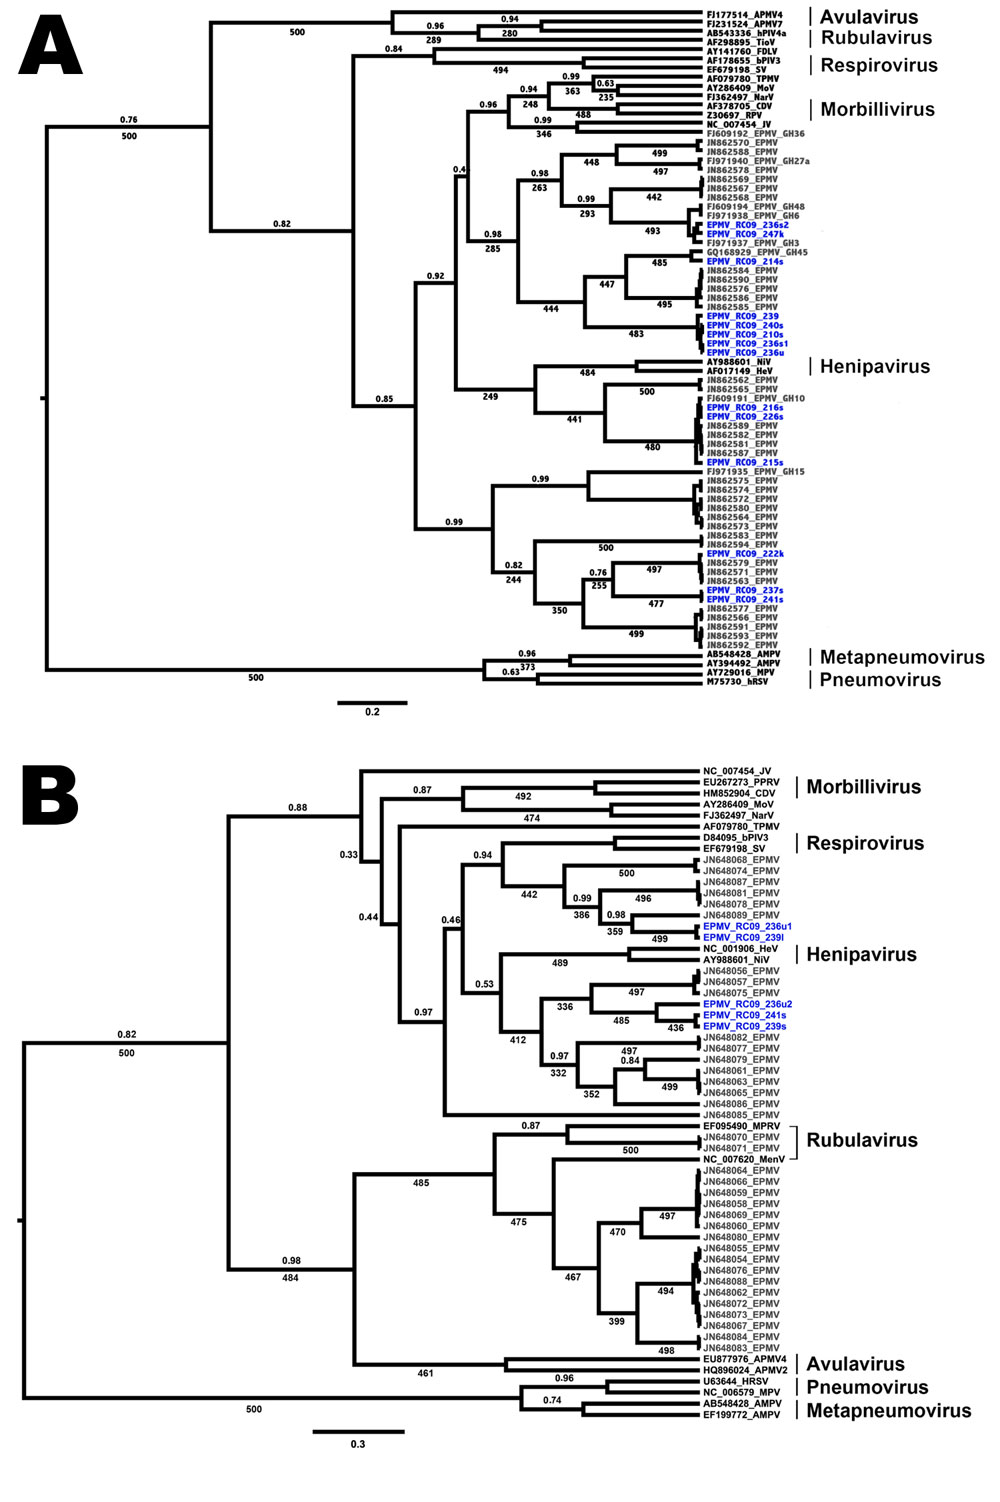 Phylogenetic trees showing the placement of Eidolon paramyxovirus (EPMV) sequences in the diversity of Paramyxoviridae, based on partial large gene sequences (384 nt and 474 nt, respectively) of the respirovirus, morbillivirus, and henipavirus fragment (A) and the Paramyxovirinae (PAR) fragment (B), Republic of Congo, 2009. EPMV sequences from Ghana are printed in gray, and novel EPMV sequences from the Republic of Congo are printed in blue. Trees were computed by using BEAST version 1.7.1 (http